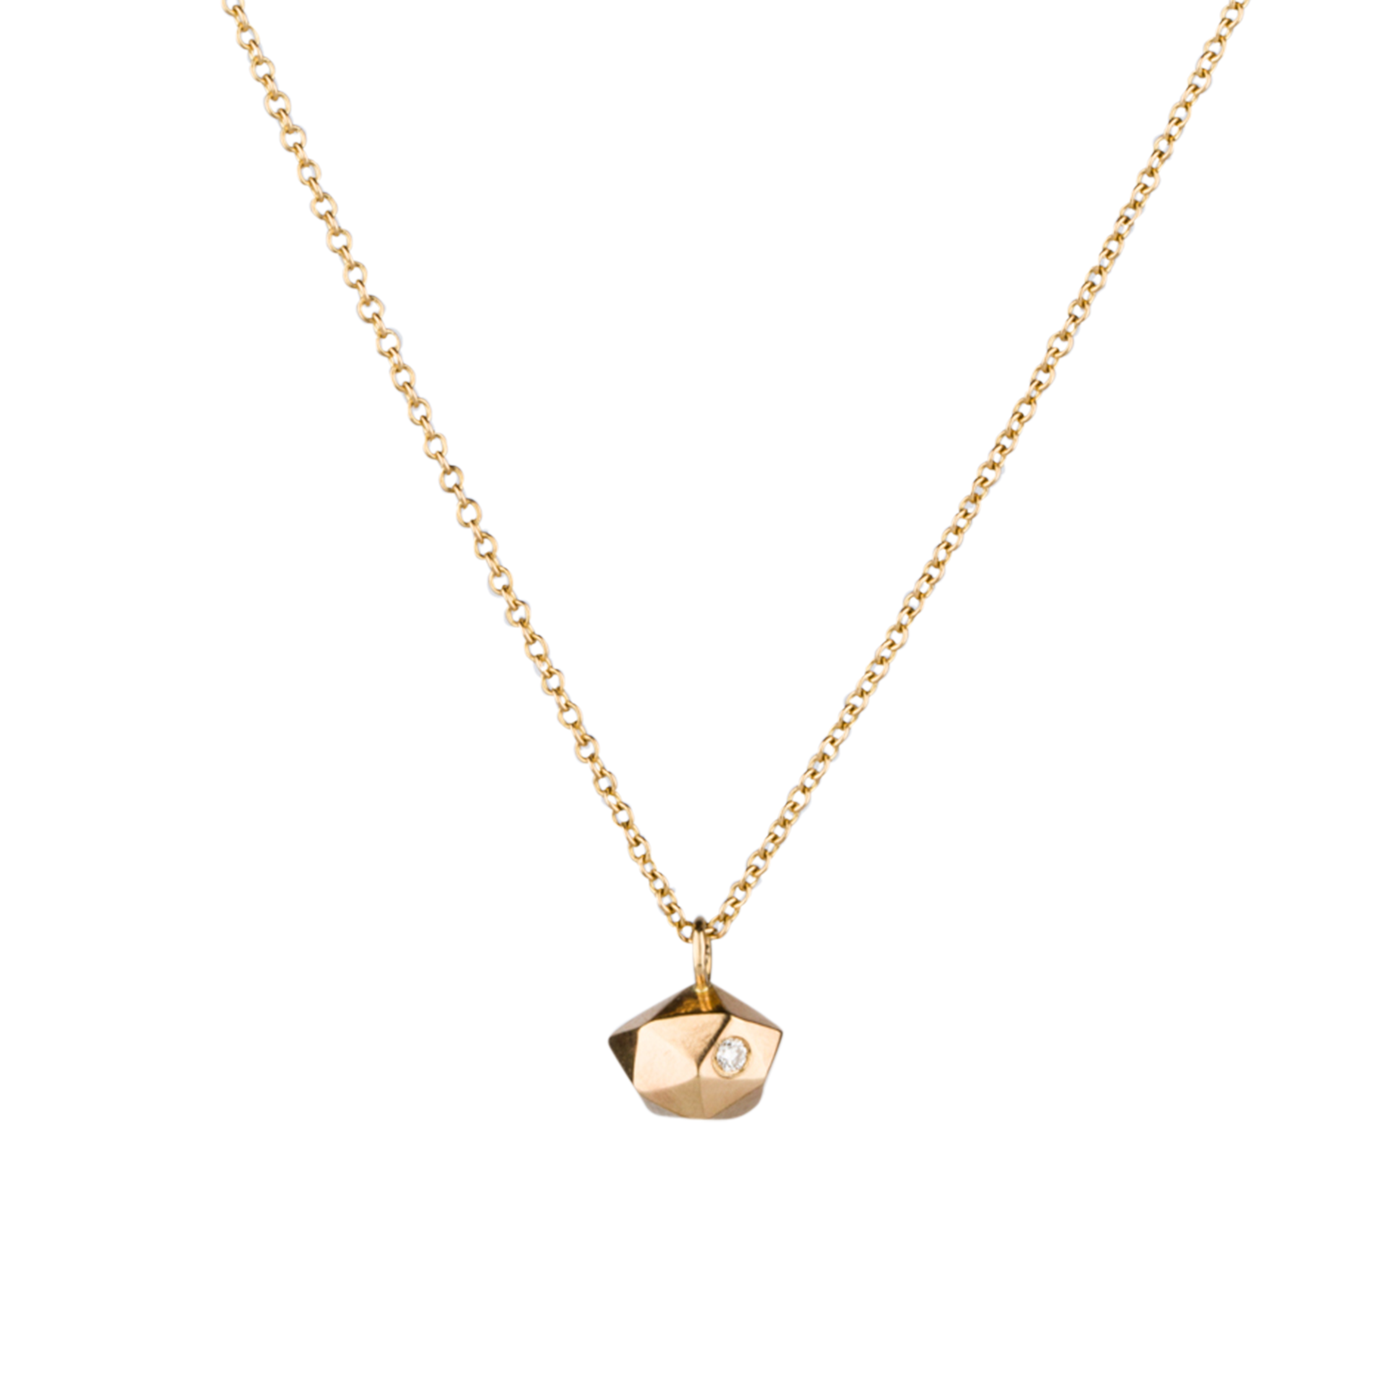 Faceted geometric gold tiny fragment necklace with a single white diamond in one facet on a white backrgound | Corey Egan